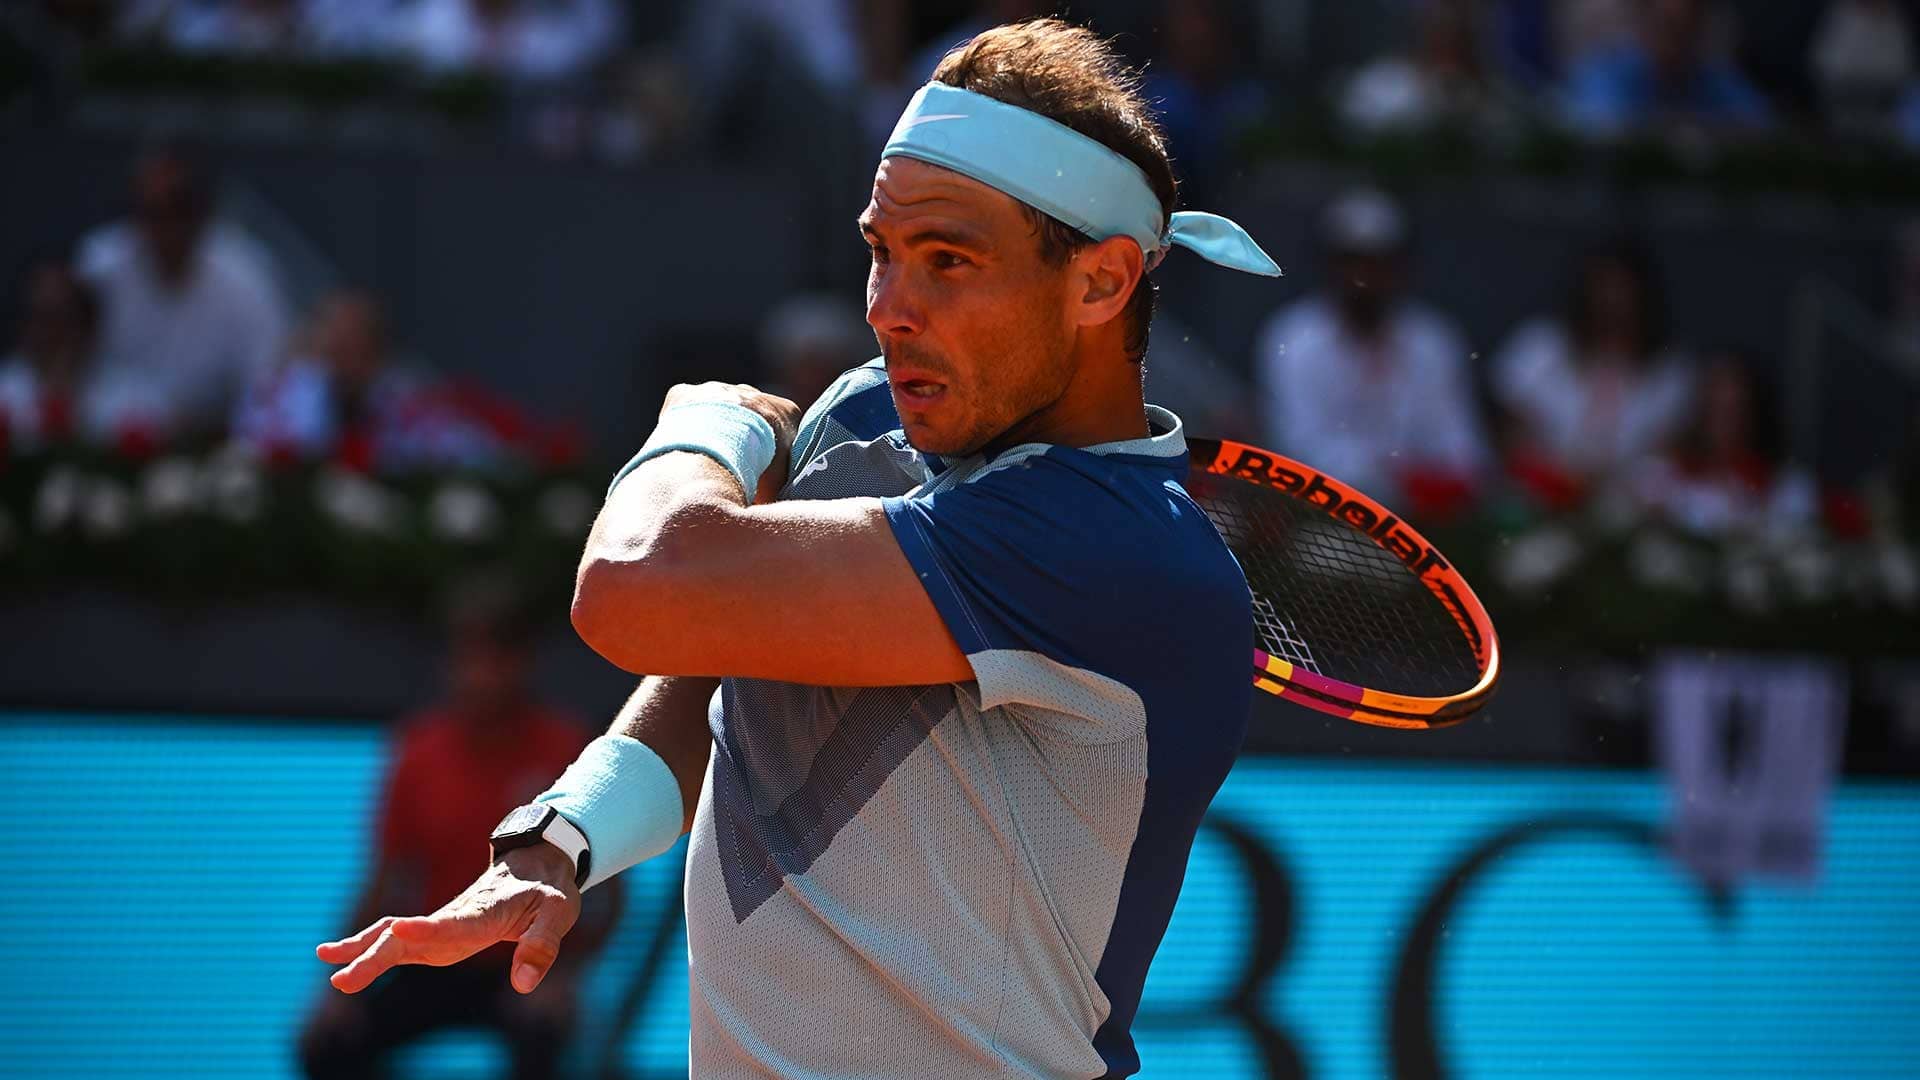 Rafael Nadal has not competed since the Australian Open in January.